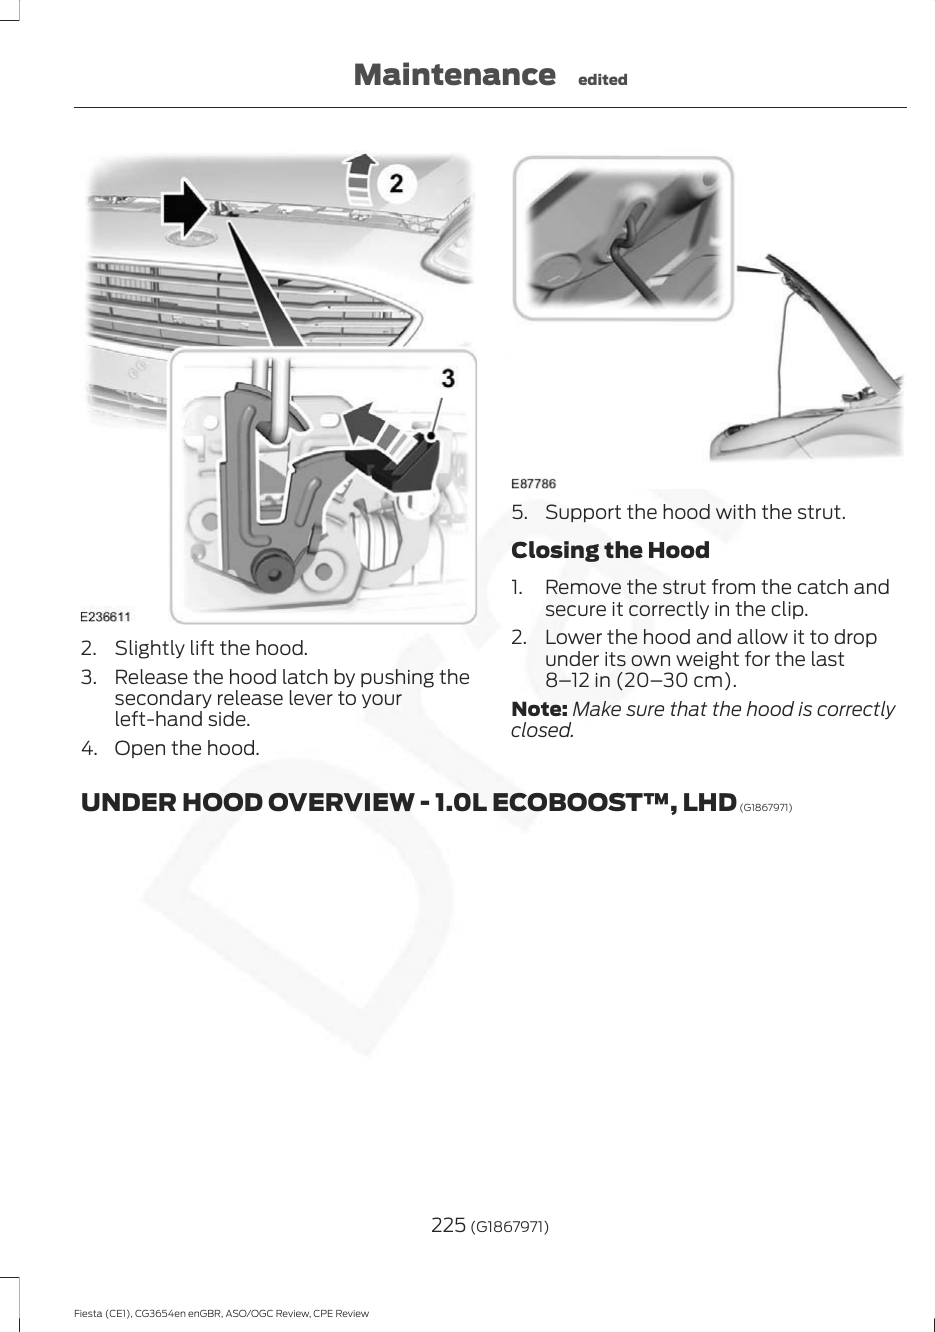 2. Slightly lift the hood.3. Release the hood latch by pushing thesecondary release lever to yourleft-hand side.4. Open the hood.5. Support the hood with the strut.Closing the Hood1. Remove the strut from the catch andsecure it correctly in the clip.2. Lower the hood and allow it to dropunder its own weight for the last8–12 in (20–30 cm).Note: Make sure that the hood is correctlyclosed.UNDER HOOD OVERVIEW - 1.0L ECOBOOST™, LHD (G1867971)225 (G1867971)Fiesta (CE1), CG3654en enGBR, ASO/OGC Review, CPE ReviewMaintenance edited